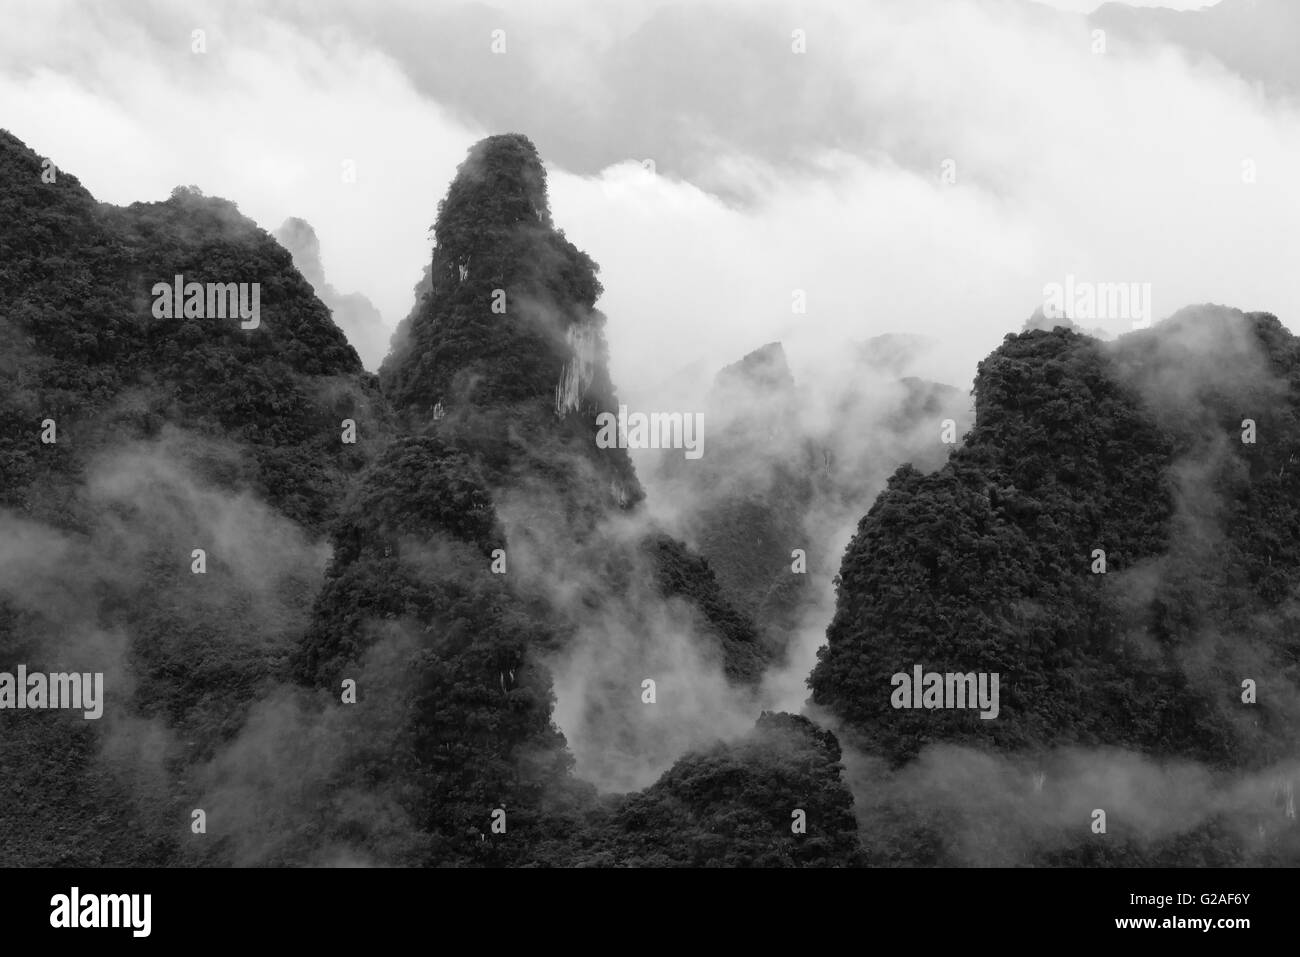 Karst hills in morning mist, Guilin, Guangxi Province, China Stock Photo